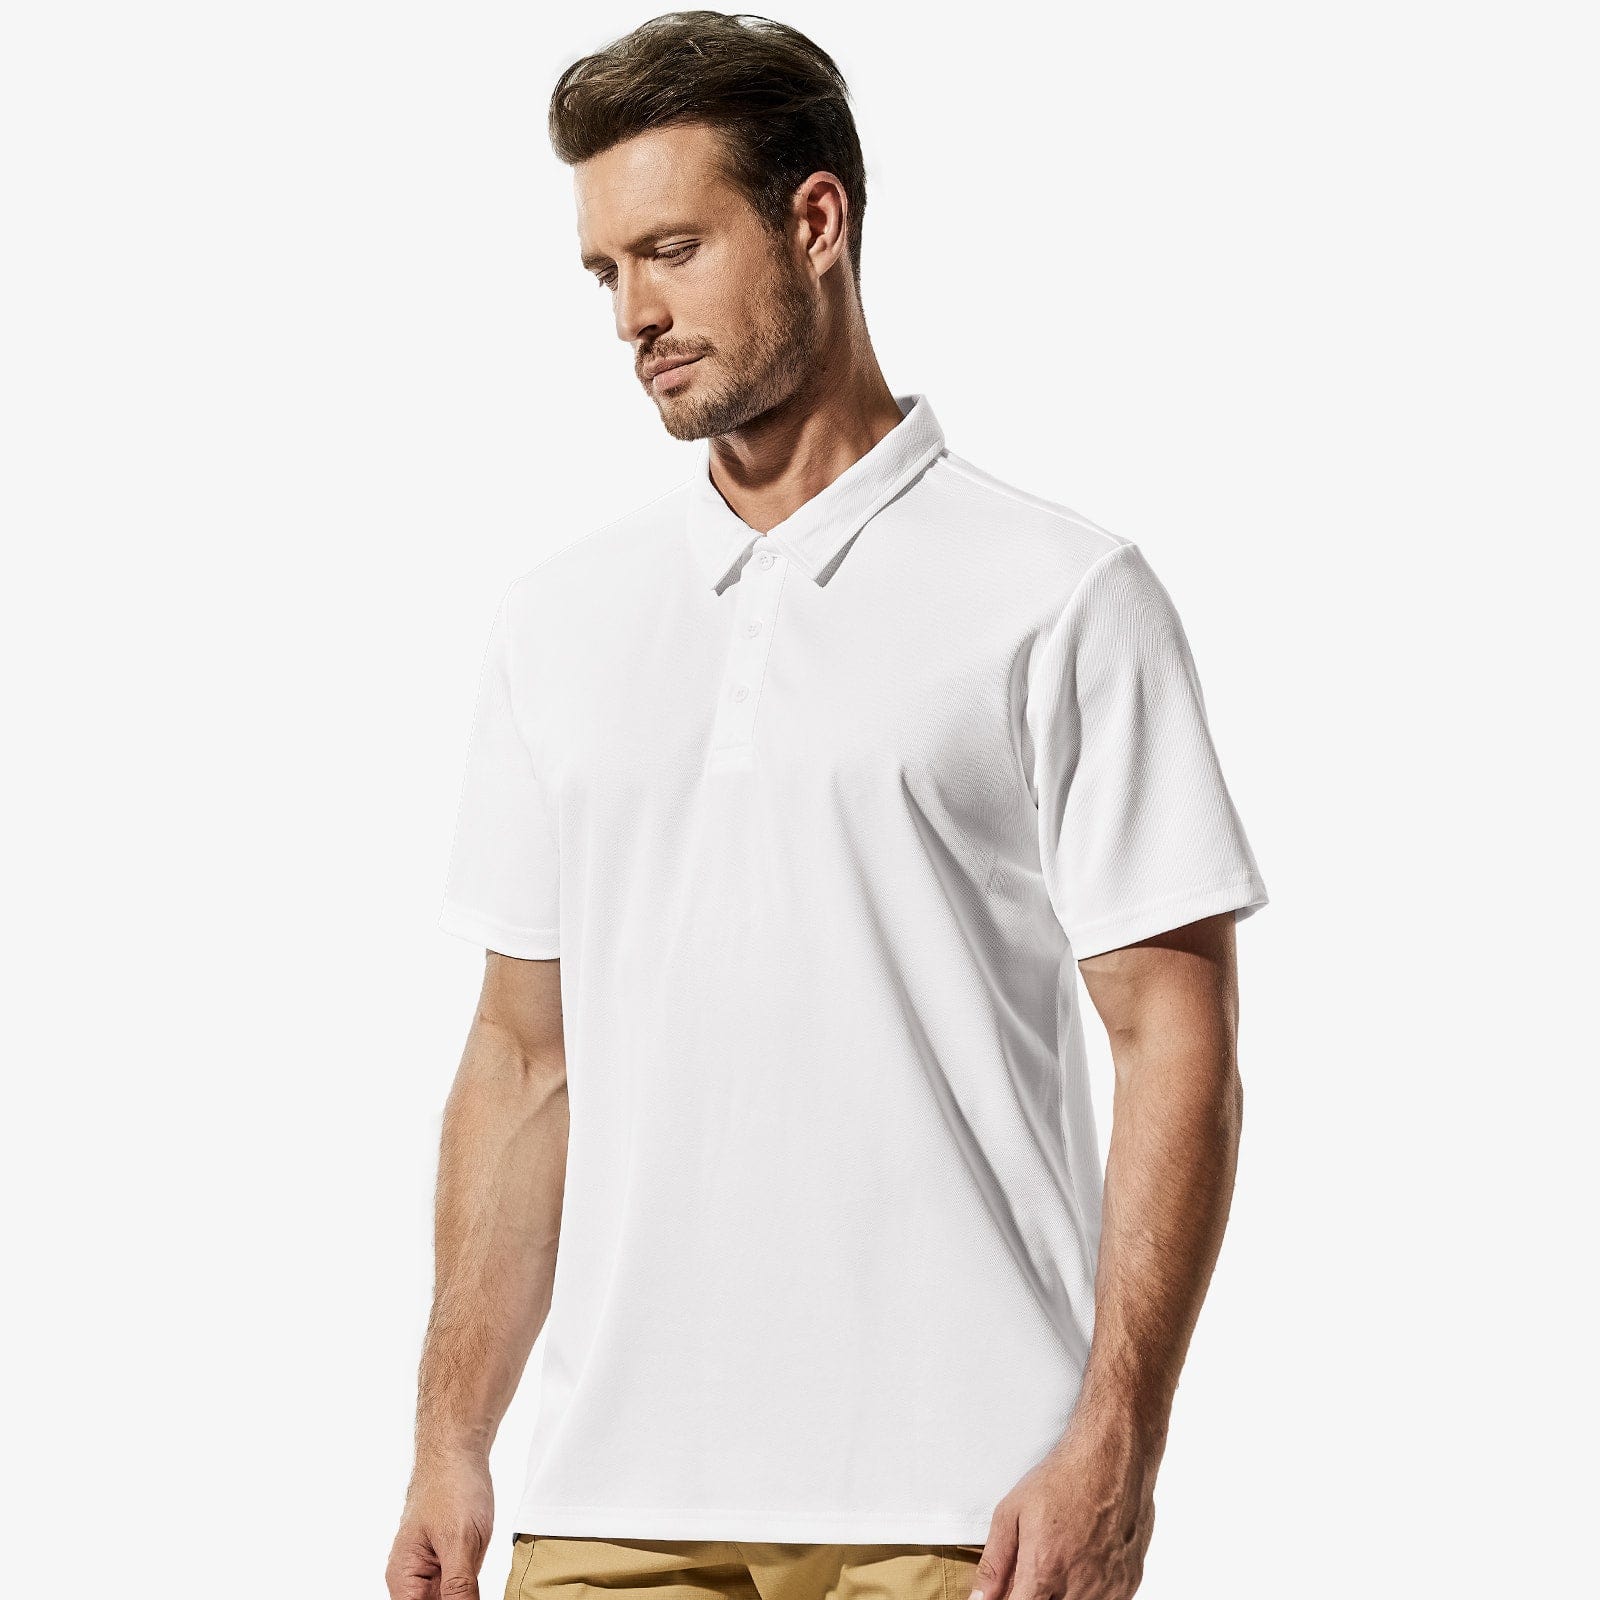 Men Quick Dry Polo Shirts Casual Collared Shirts Short Sleeve Men Polo White / S MIER